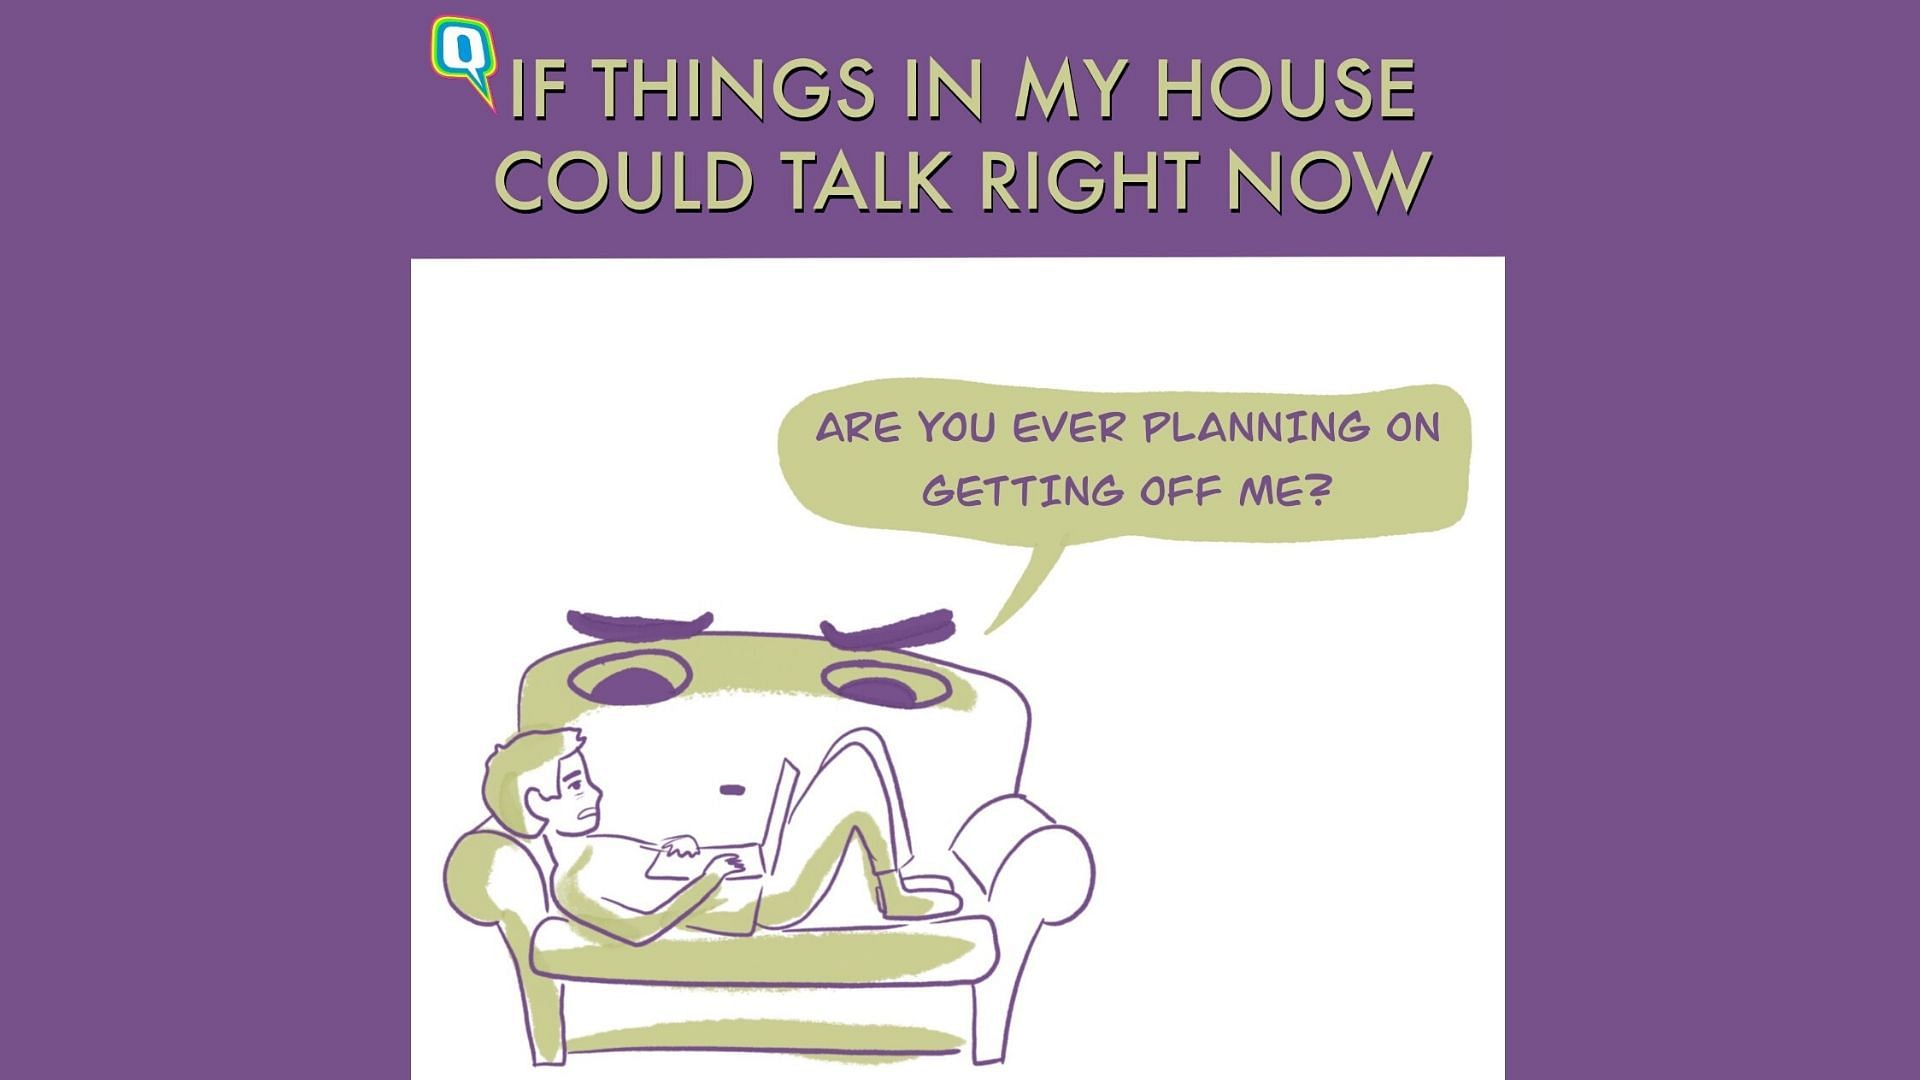 If things in my house could talk back, here’s what they’d probably say.